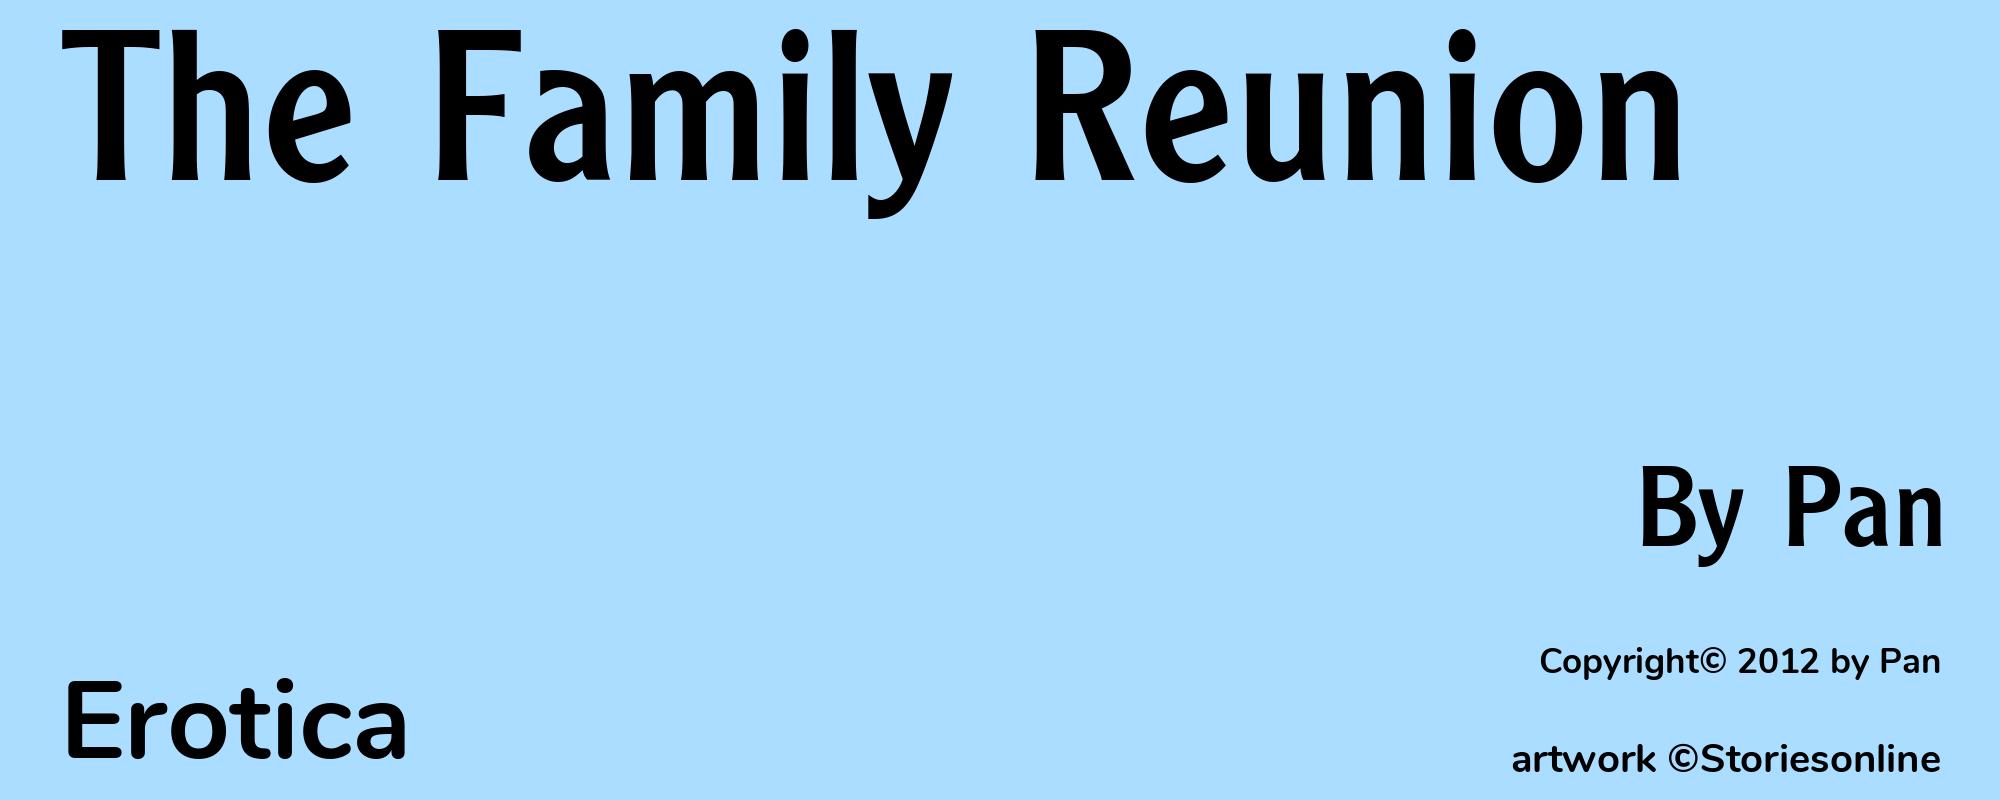 The Family Reunion - Cover